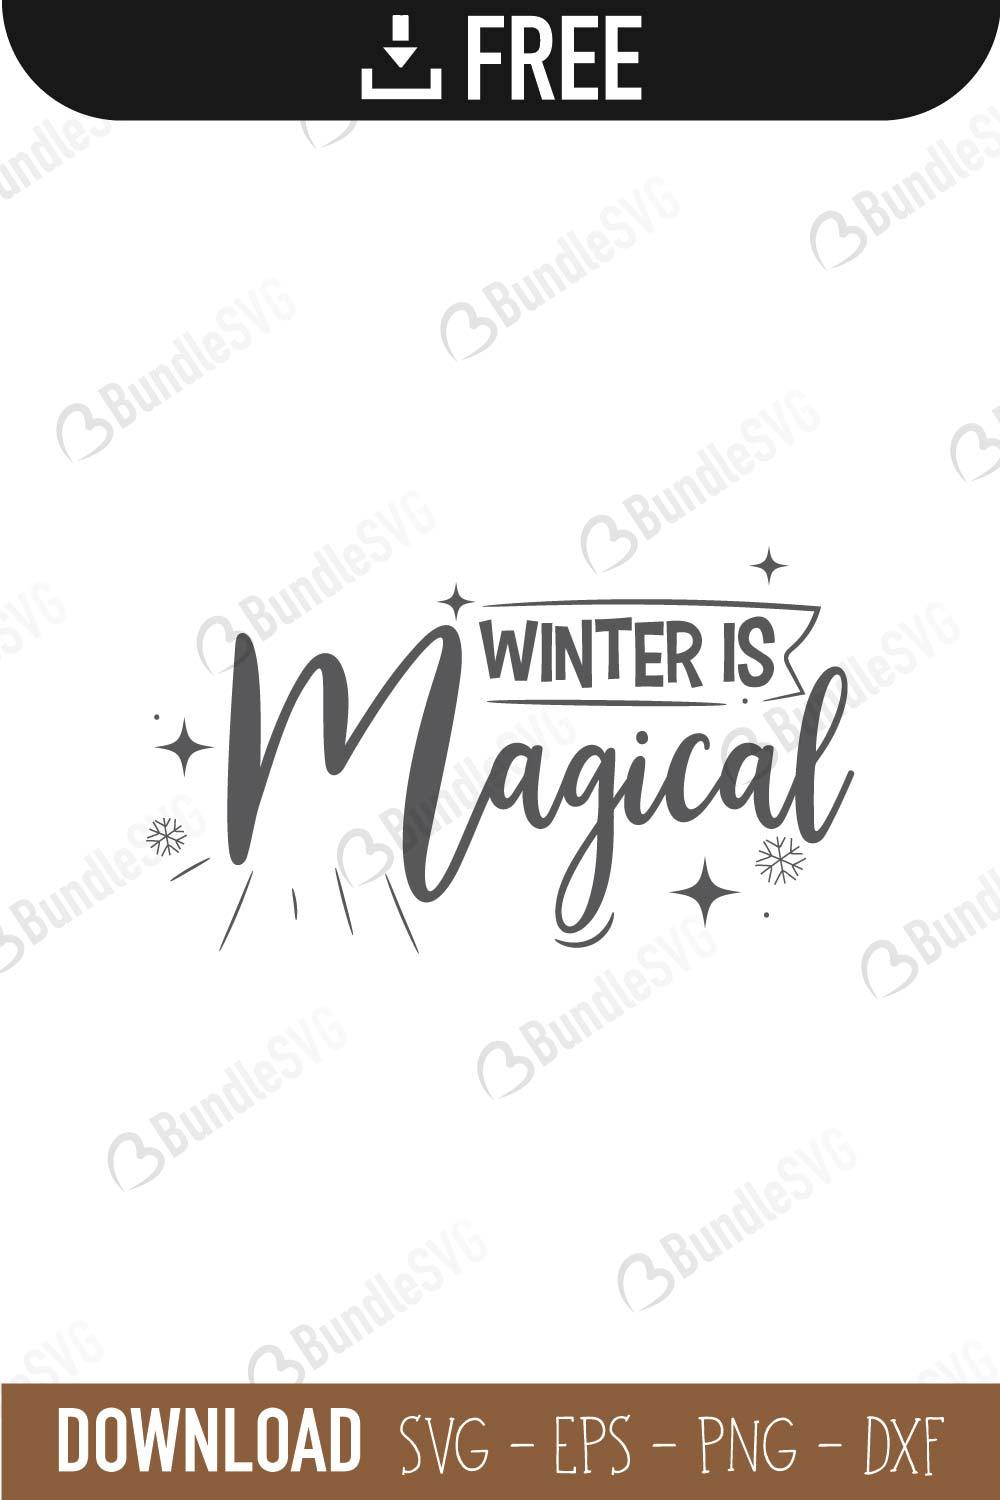 Download Winter Svg Bundle Pack 5 Svg Files Winter Svg File Sayings Quotes Svg For Cricut Pack Instant Download Day Winter Shirt 2 Clip Art Art Collectibles